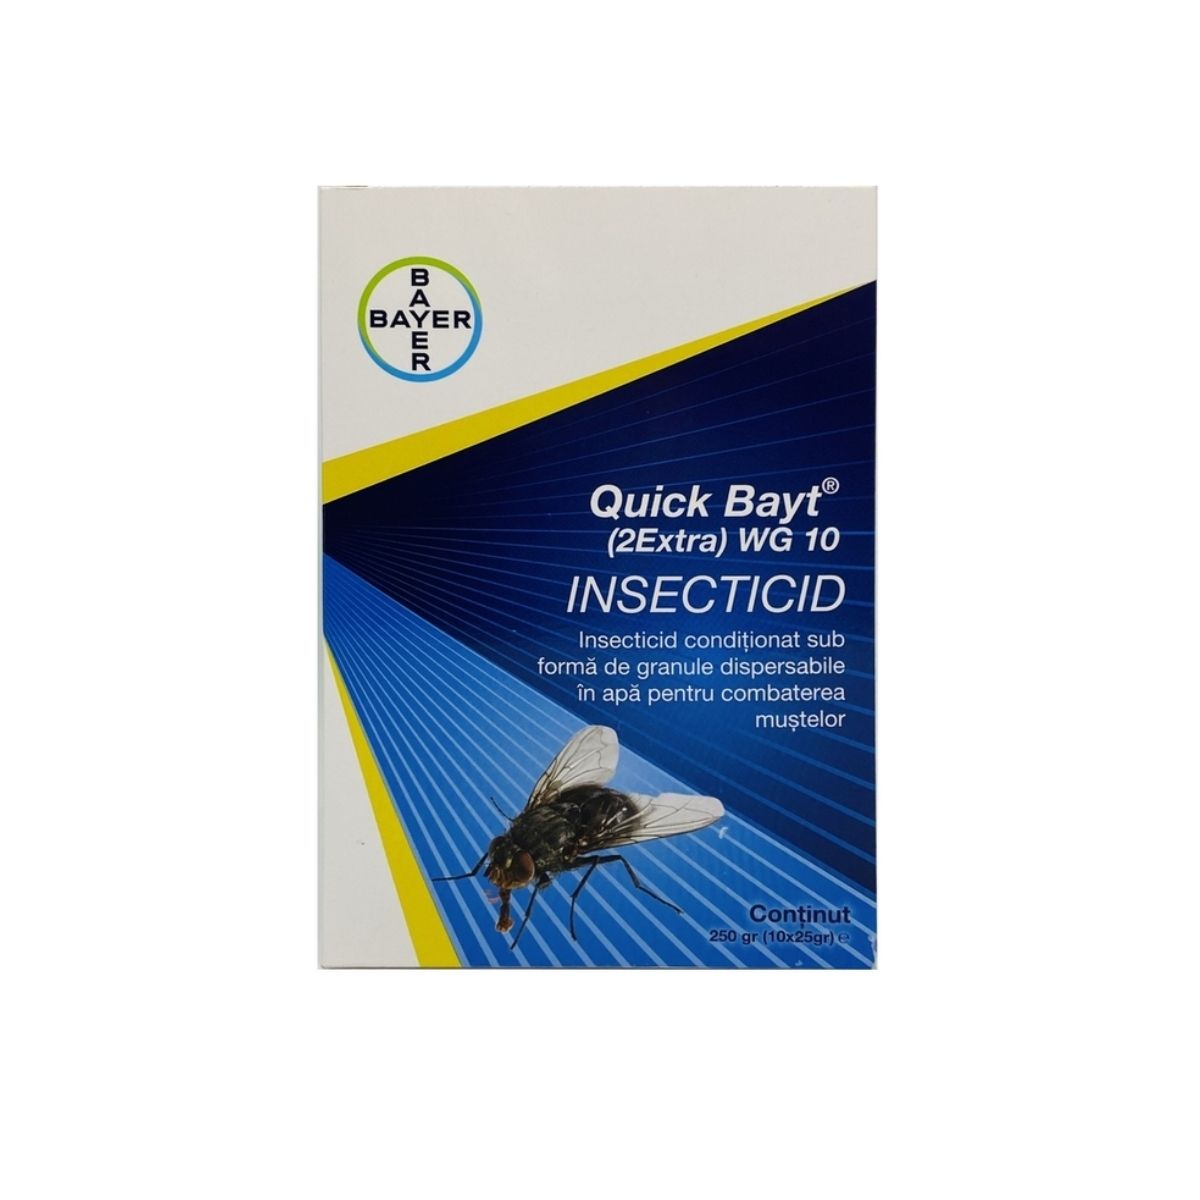 Insecticide - Insecticid QUICK BAYT EXTRA 10 WG 25g, hectarul.ro